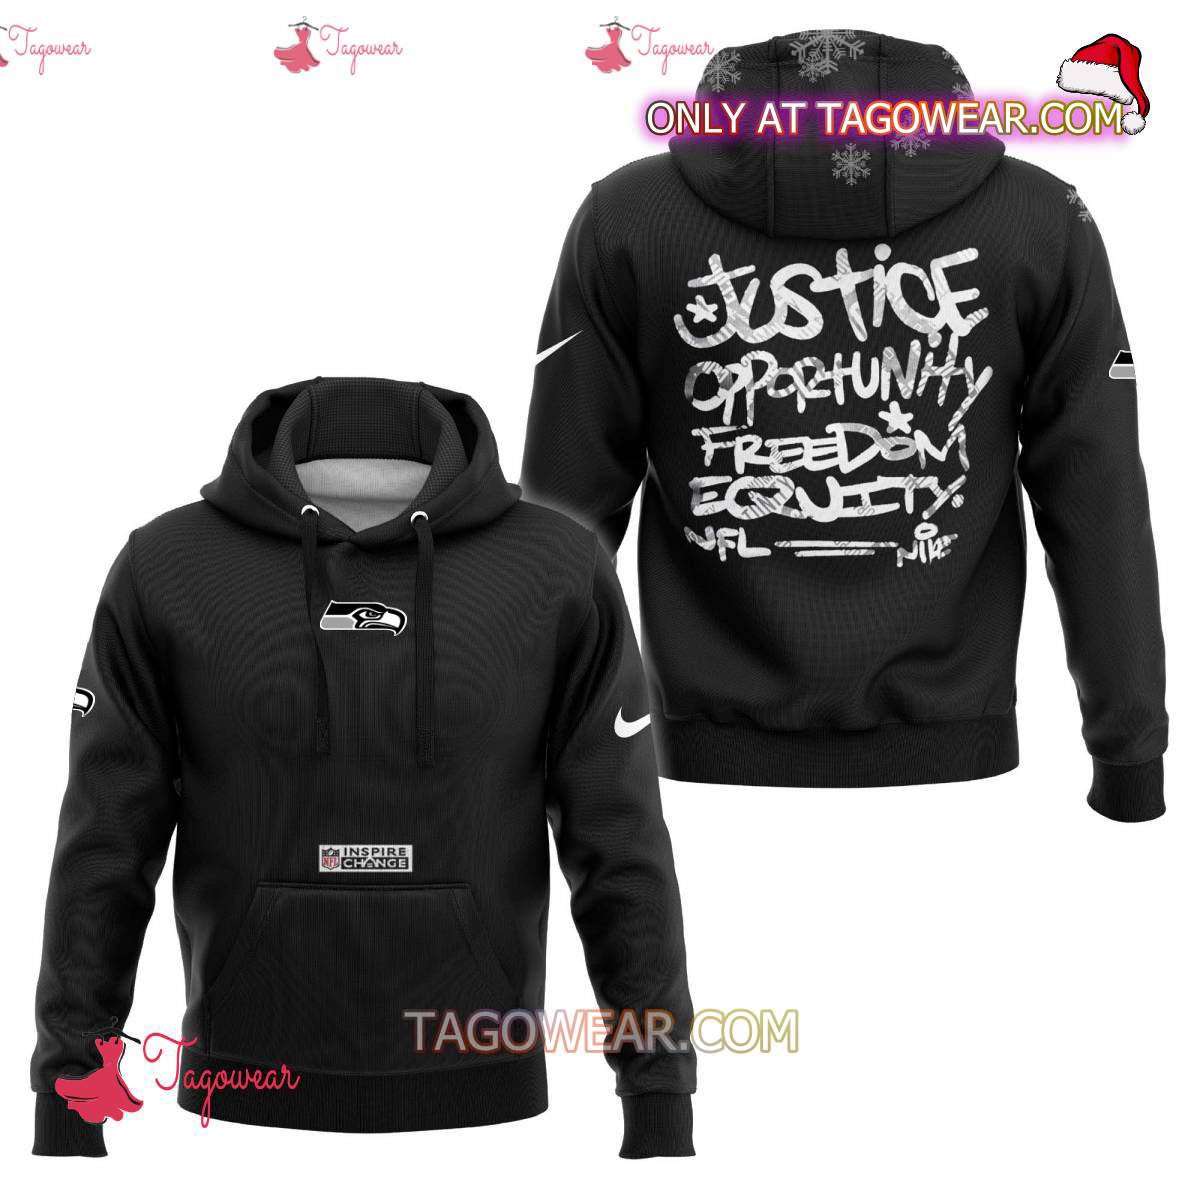 Seattle Seahawks NFL Inspire Change Justice Opportunity Equality Freedom Hoodie